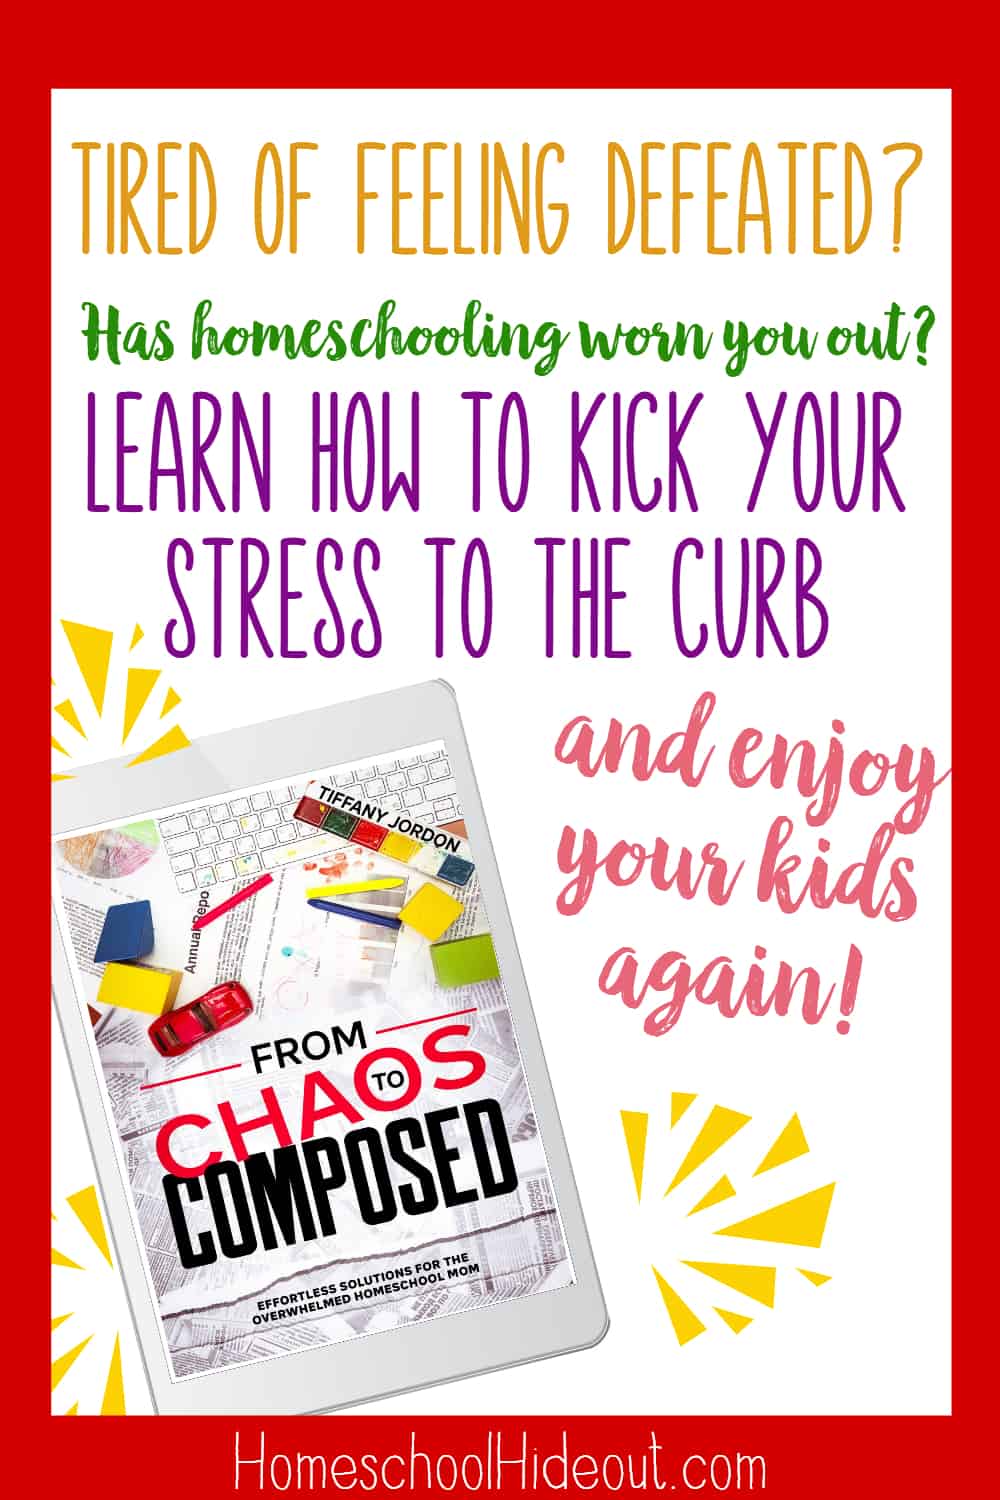 Are you an overwhelmed homeschool mom? Tired of feeling defeated? Check out these effortless tips to whip your life into shape! #homeschoolers #selfhelp #ebook #overwhelmed